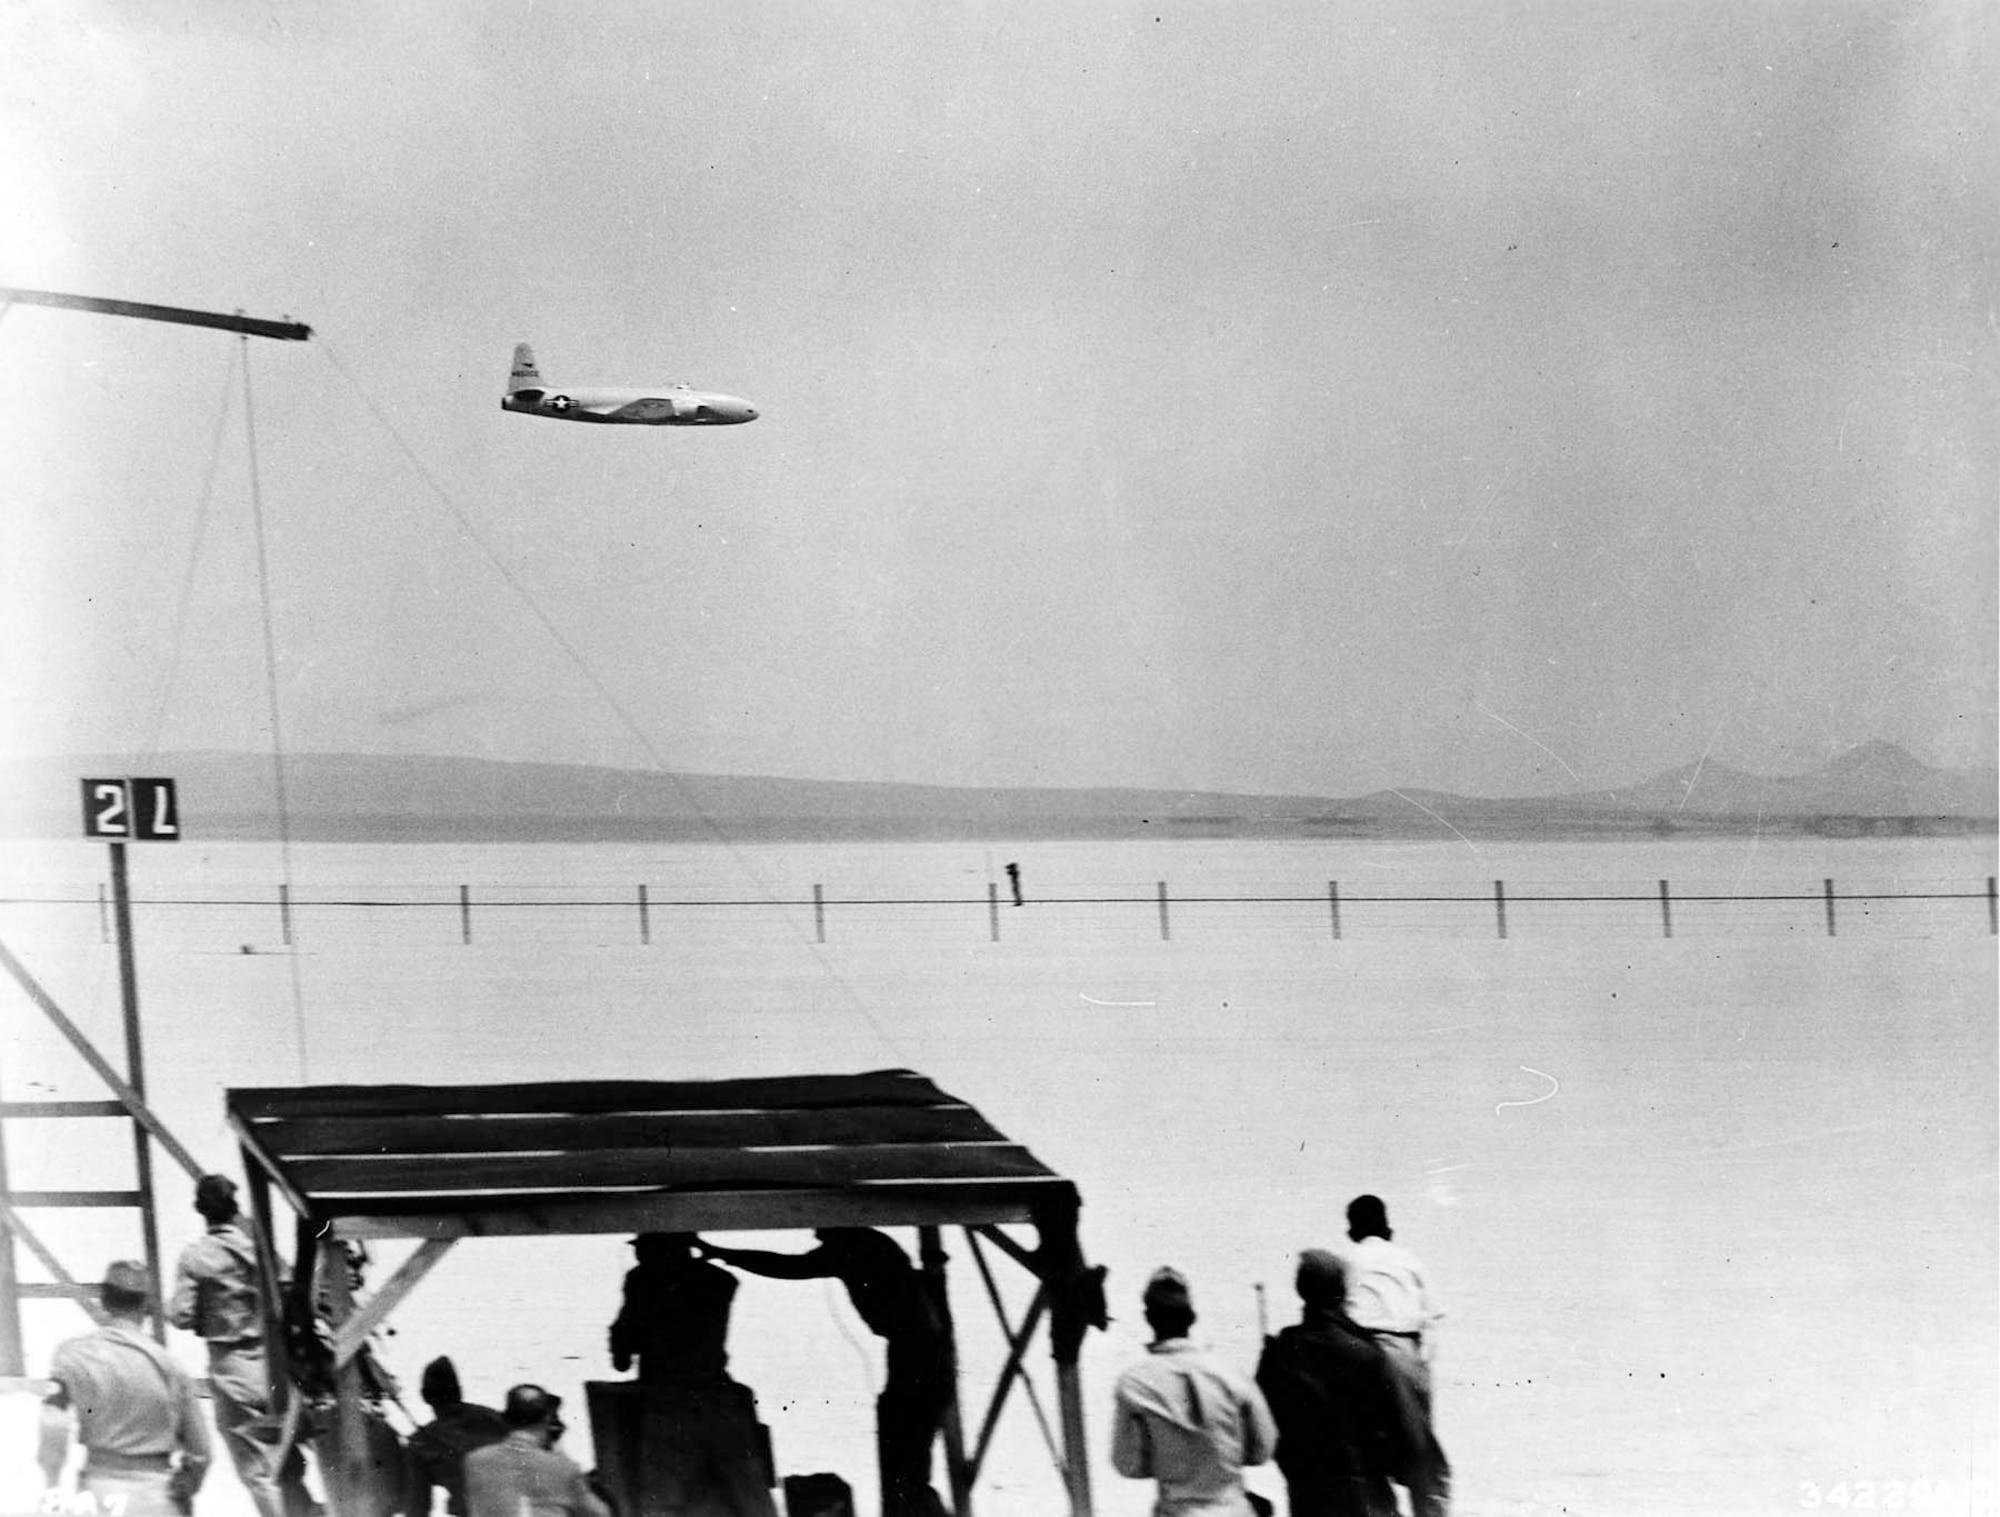 P-80R flying past a speed marking station at Muroc Army Air Field. On June 19, 1947, at Muroc Army Air Field (now Edwards Air Force Base), Calif., Col. Albert Boyd flew this P-80R to a new world's speed record of 623.753 mph, returning the record to the United States after nearly 24 years. (U.S. Air Force photo)